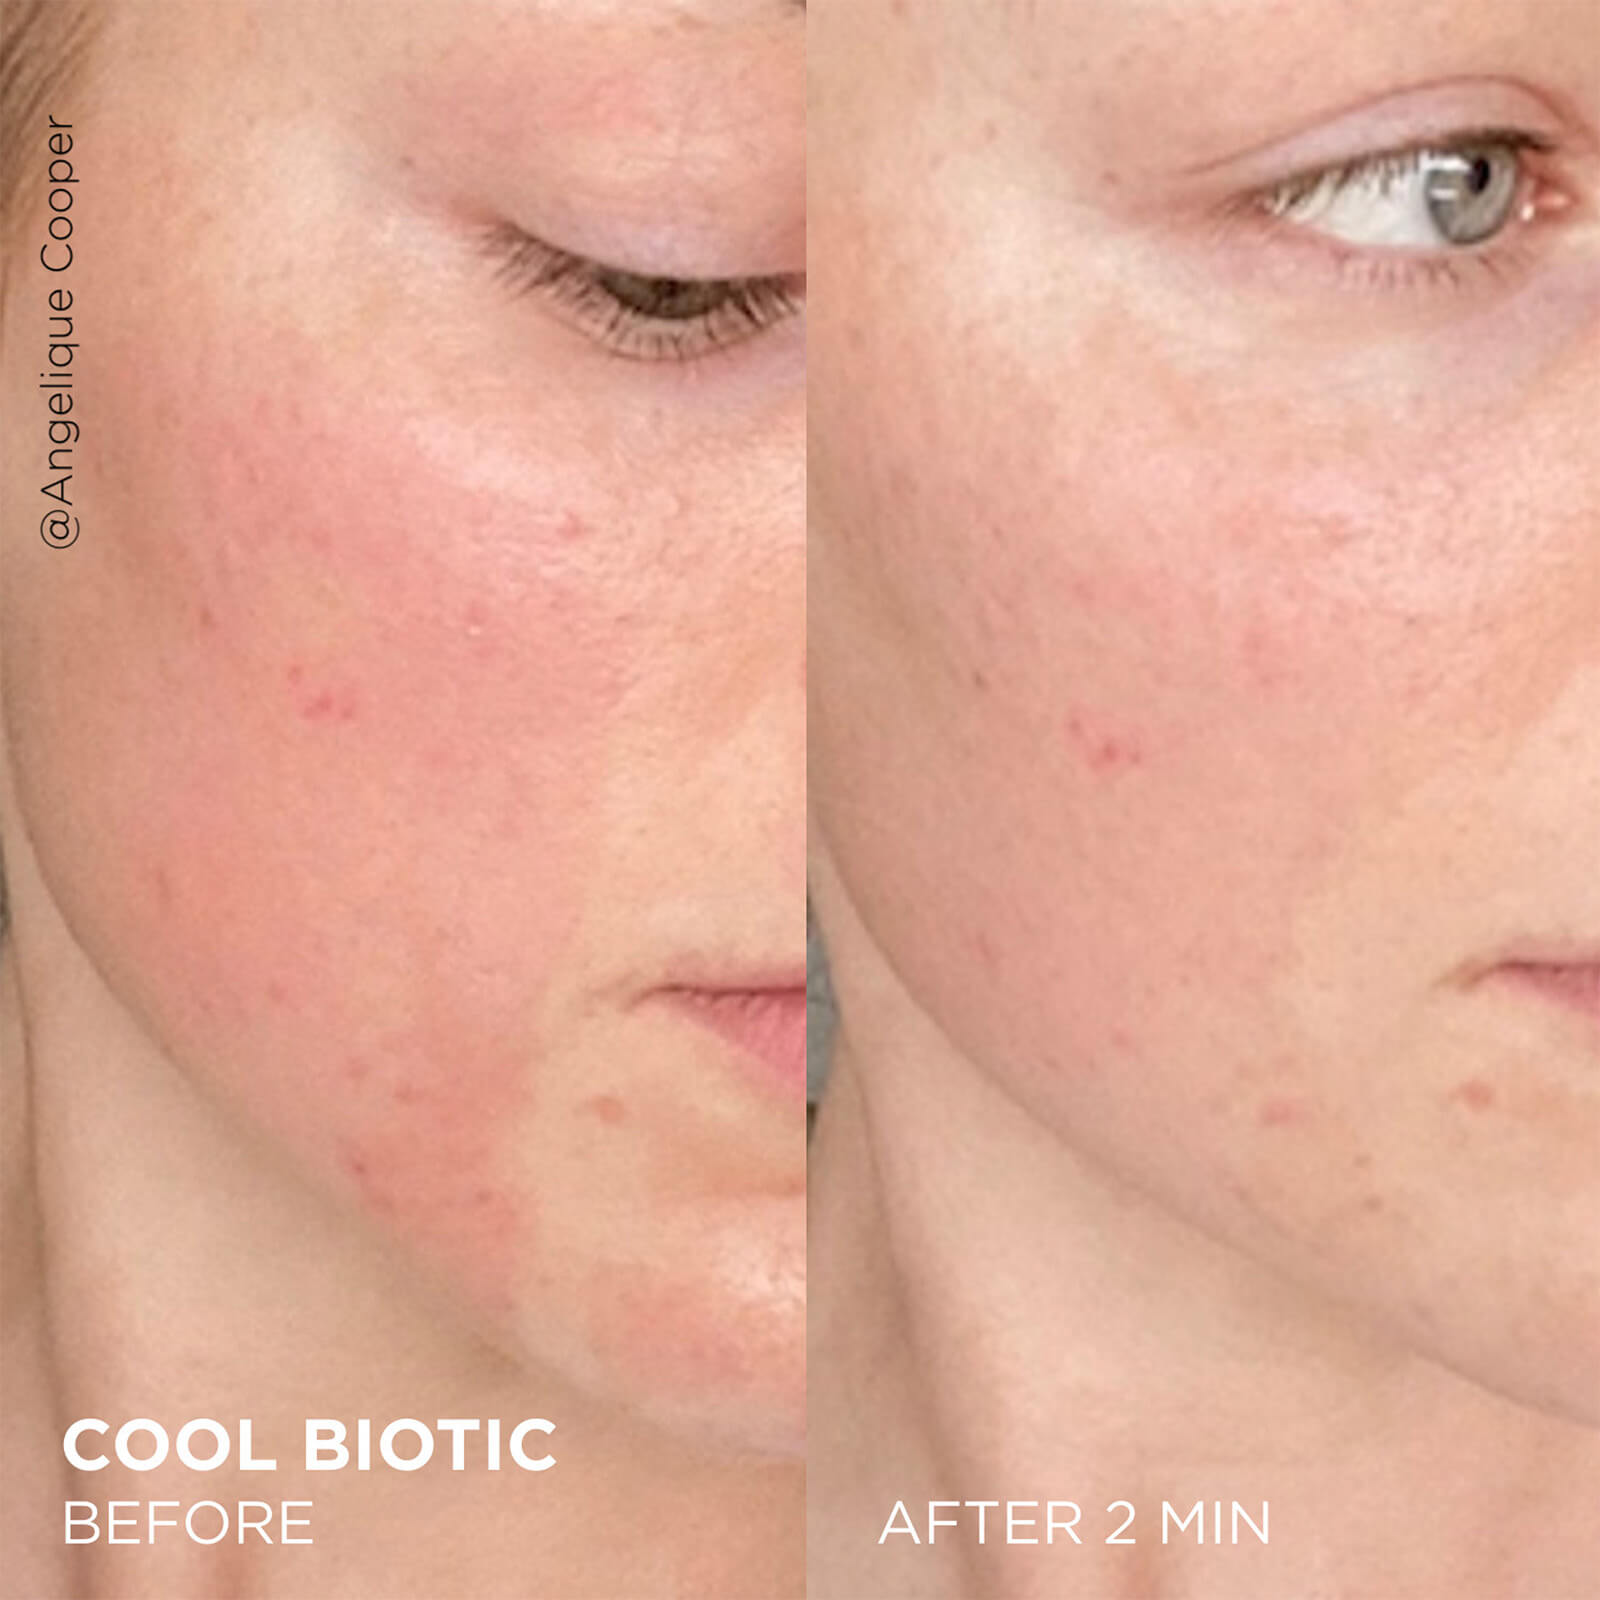 cool biotic before, after 2 min